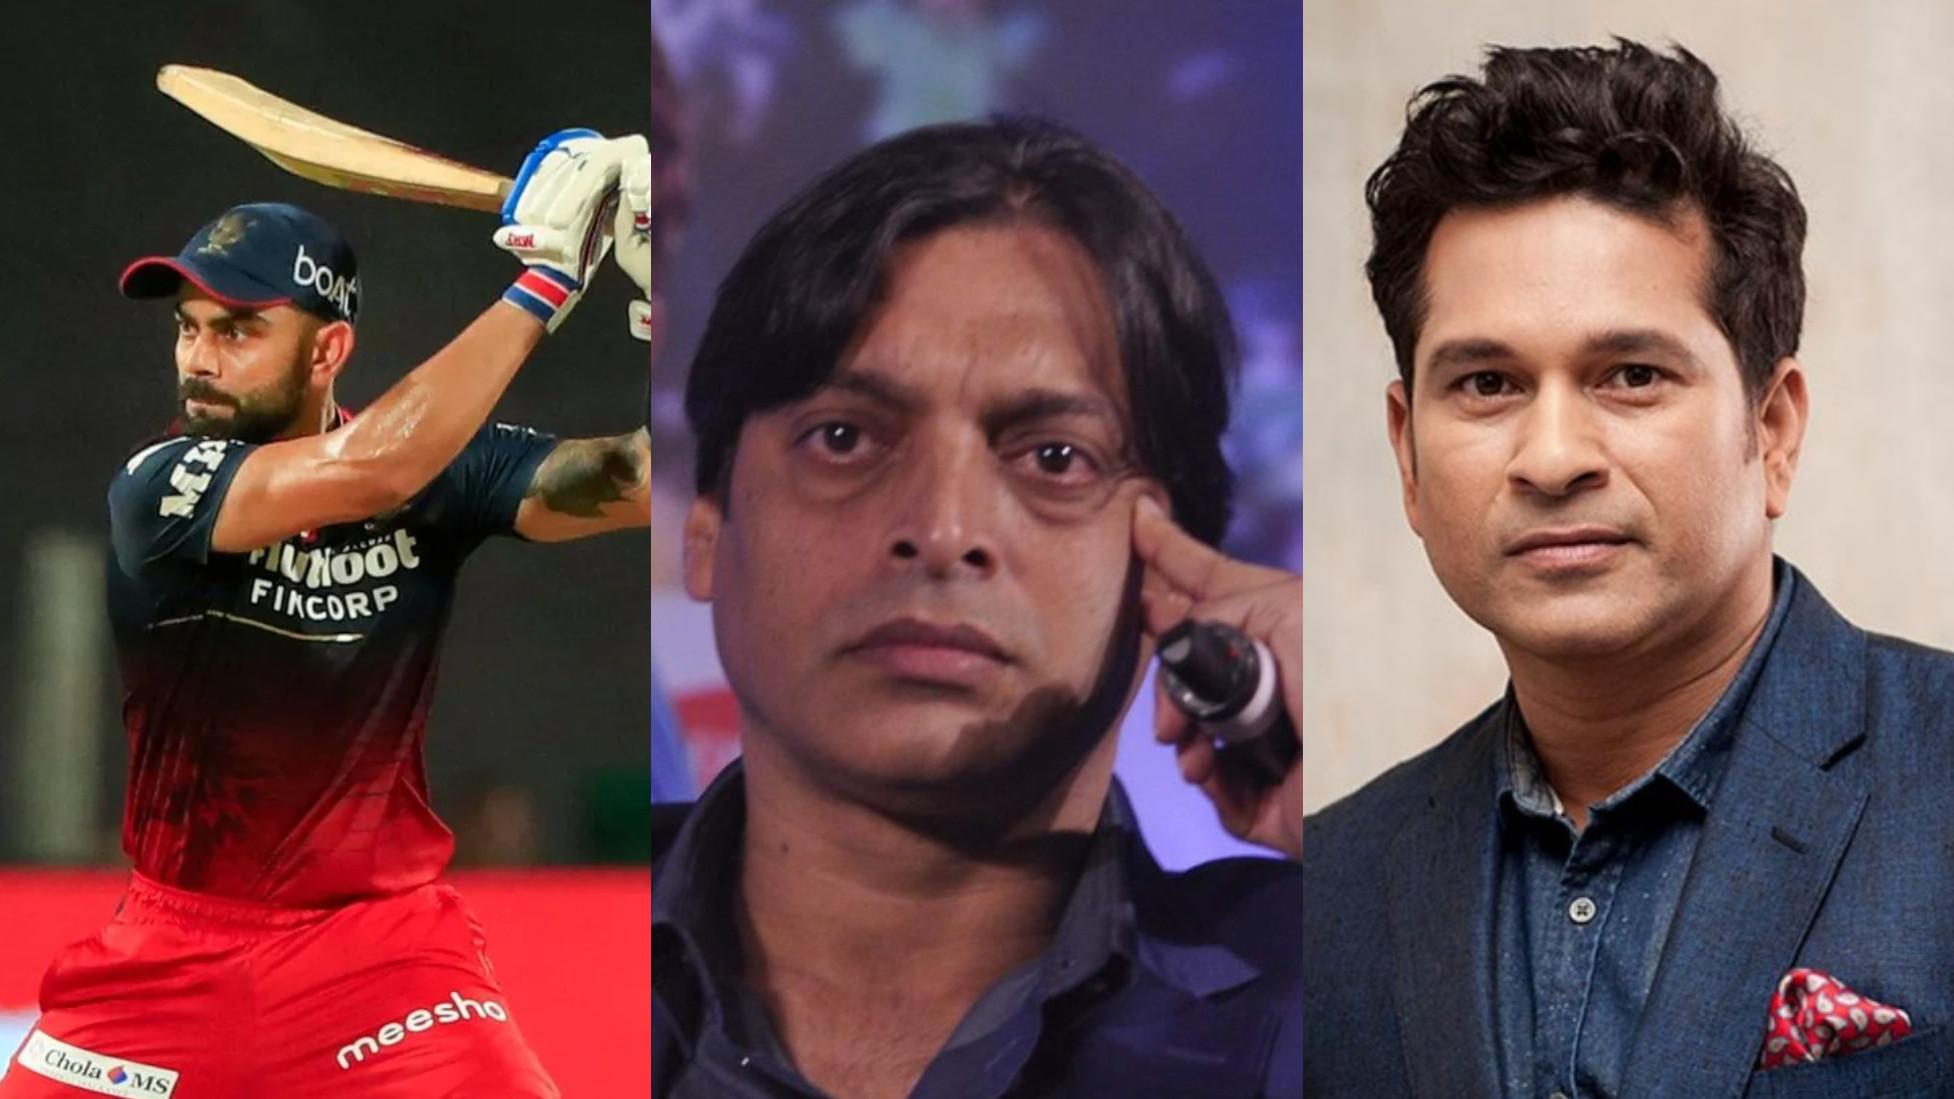 Shoaib Akhtar wants Kohli to make 110 centuries; lauds Tendulkar for being thoughtful about what he says